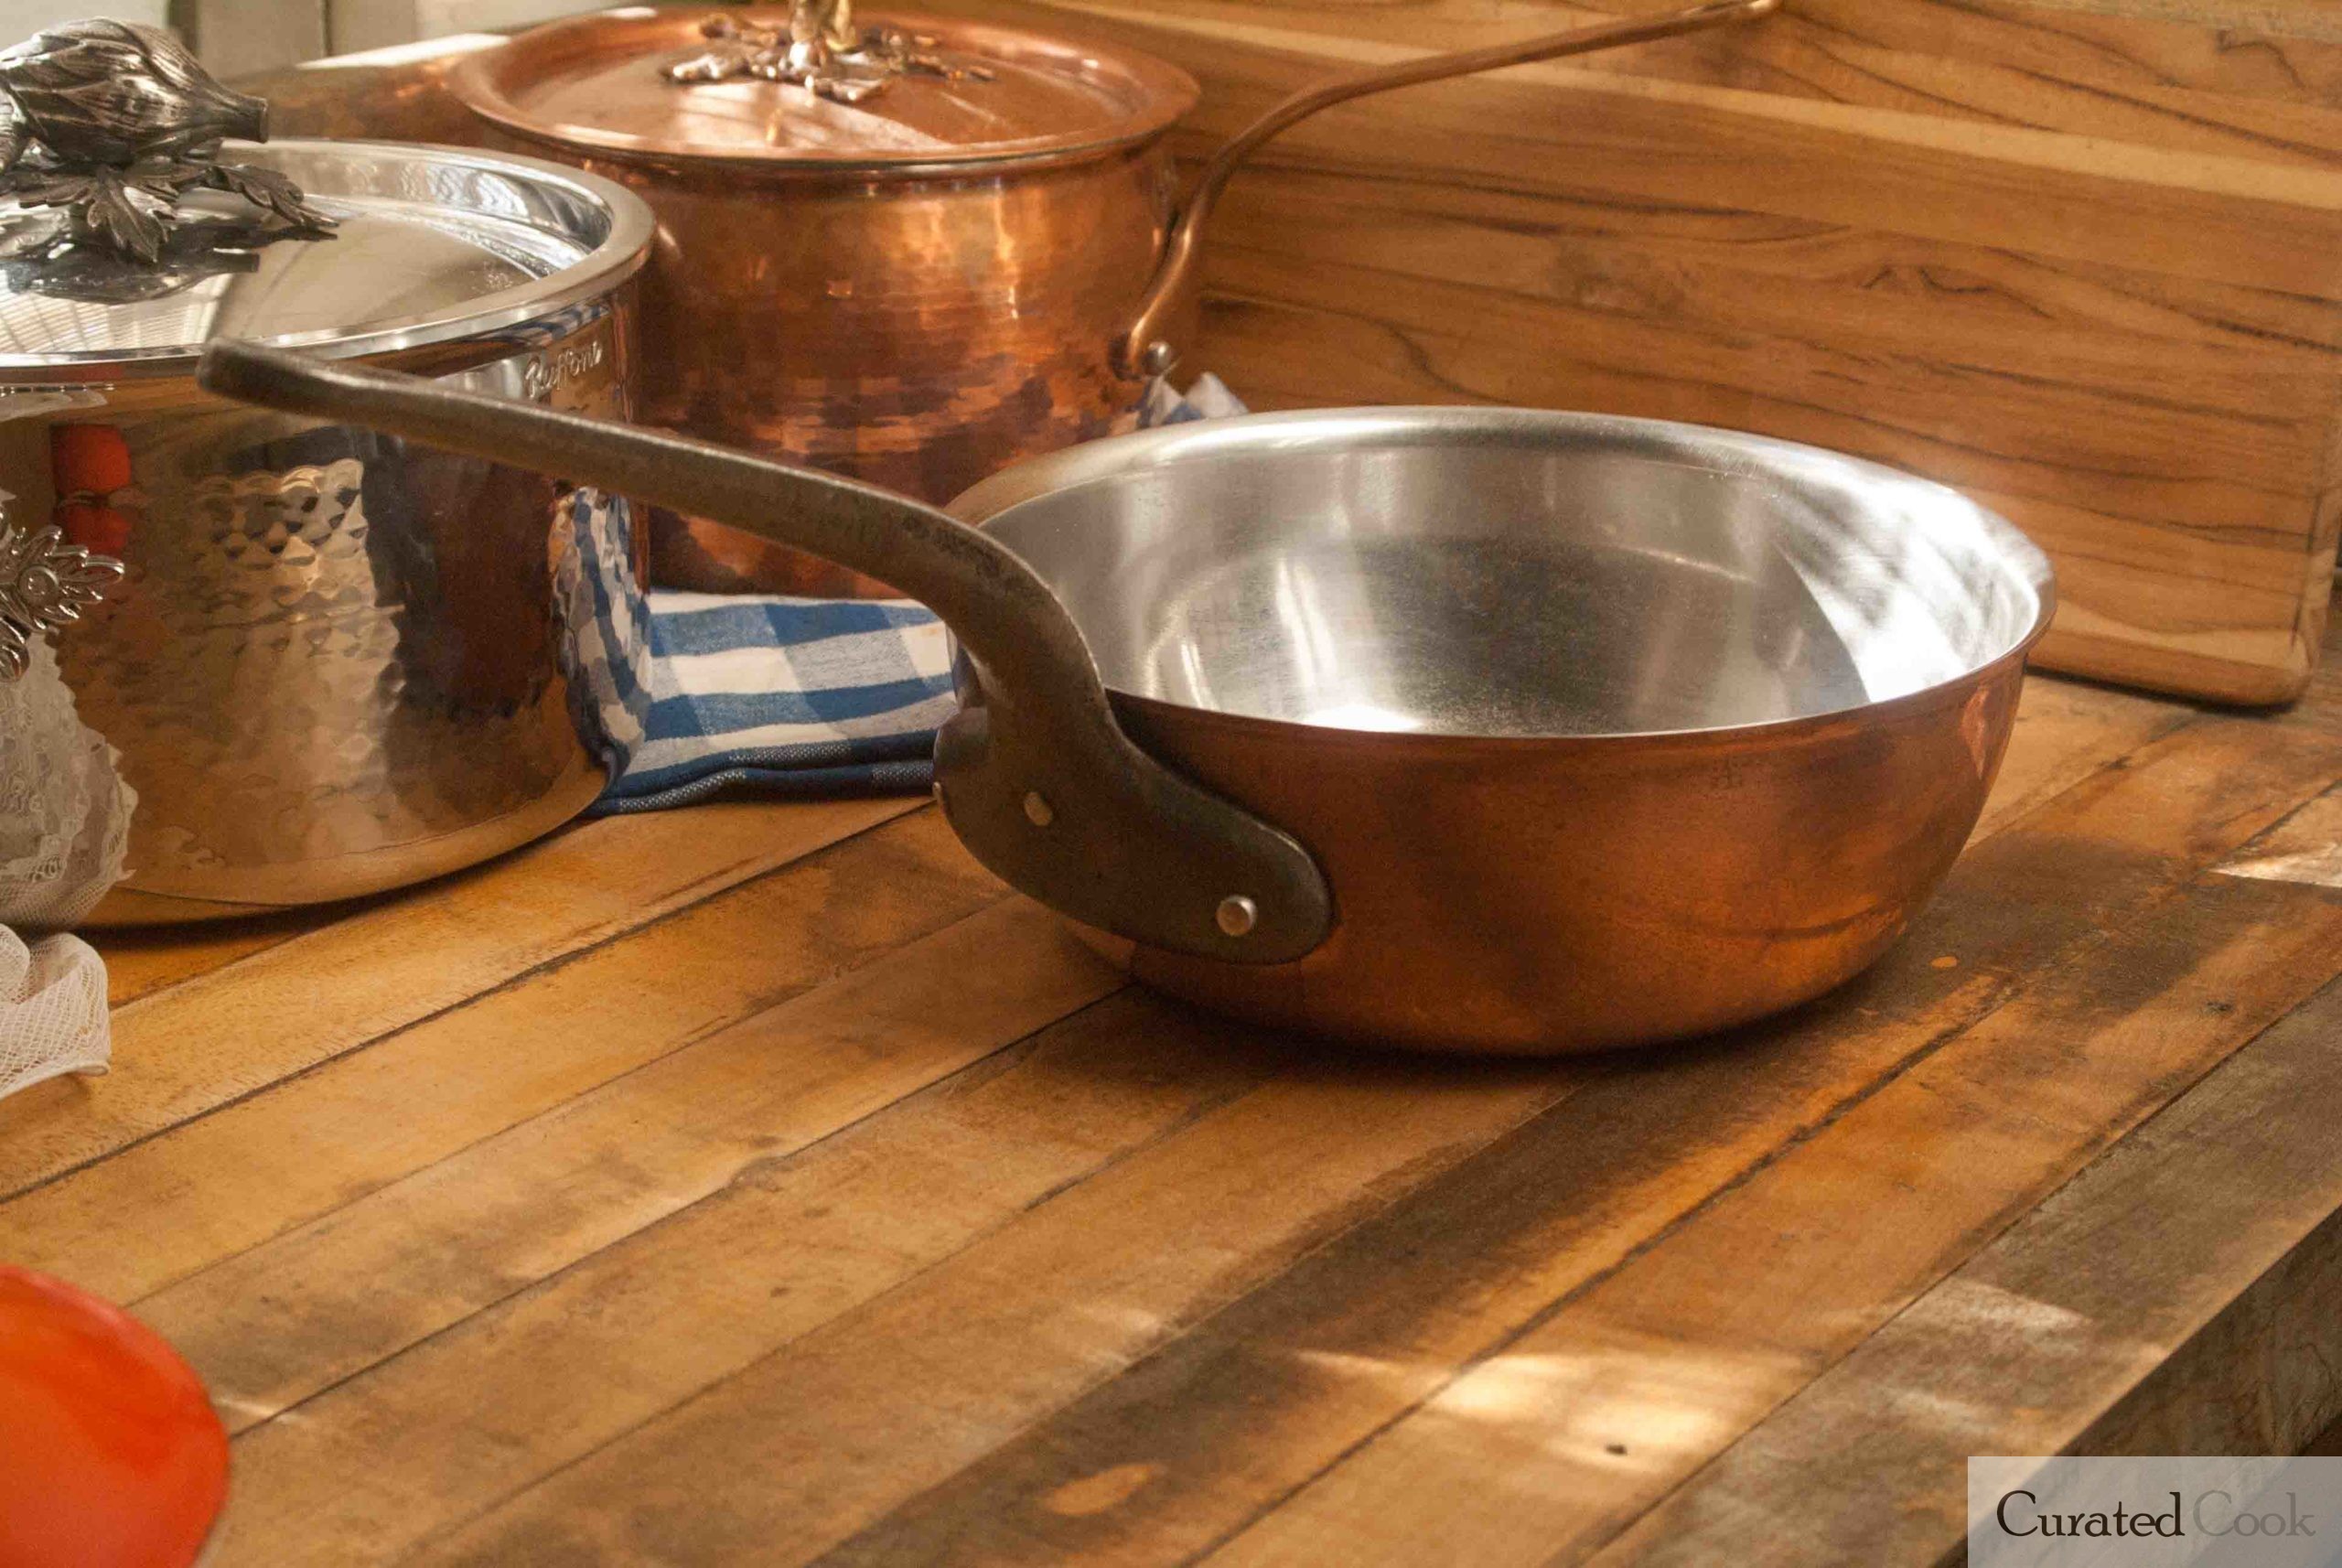 Matfer Bourgeat Saucier Review - Curated Cook Copper Cookware All Clad Curated Vs Stainless Steel